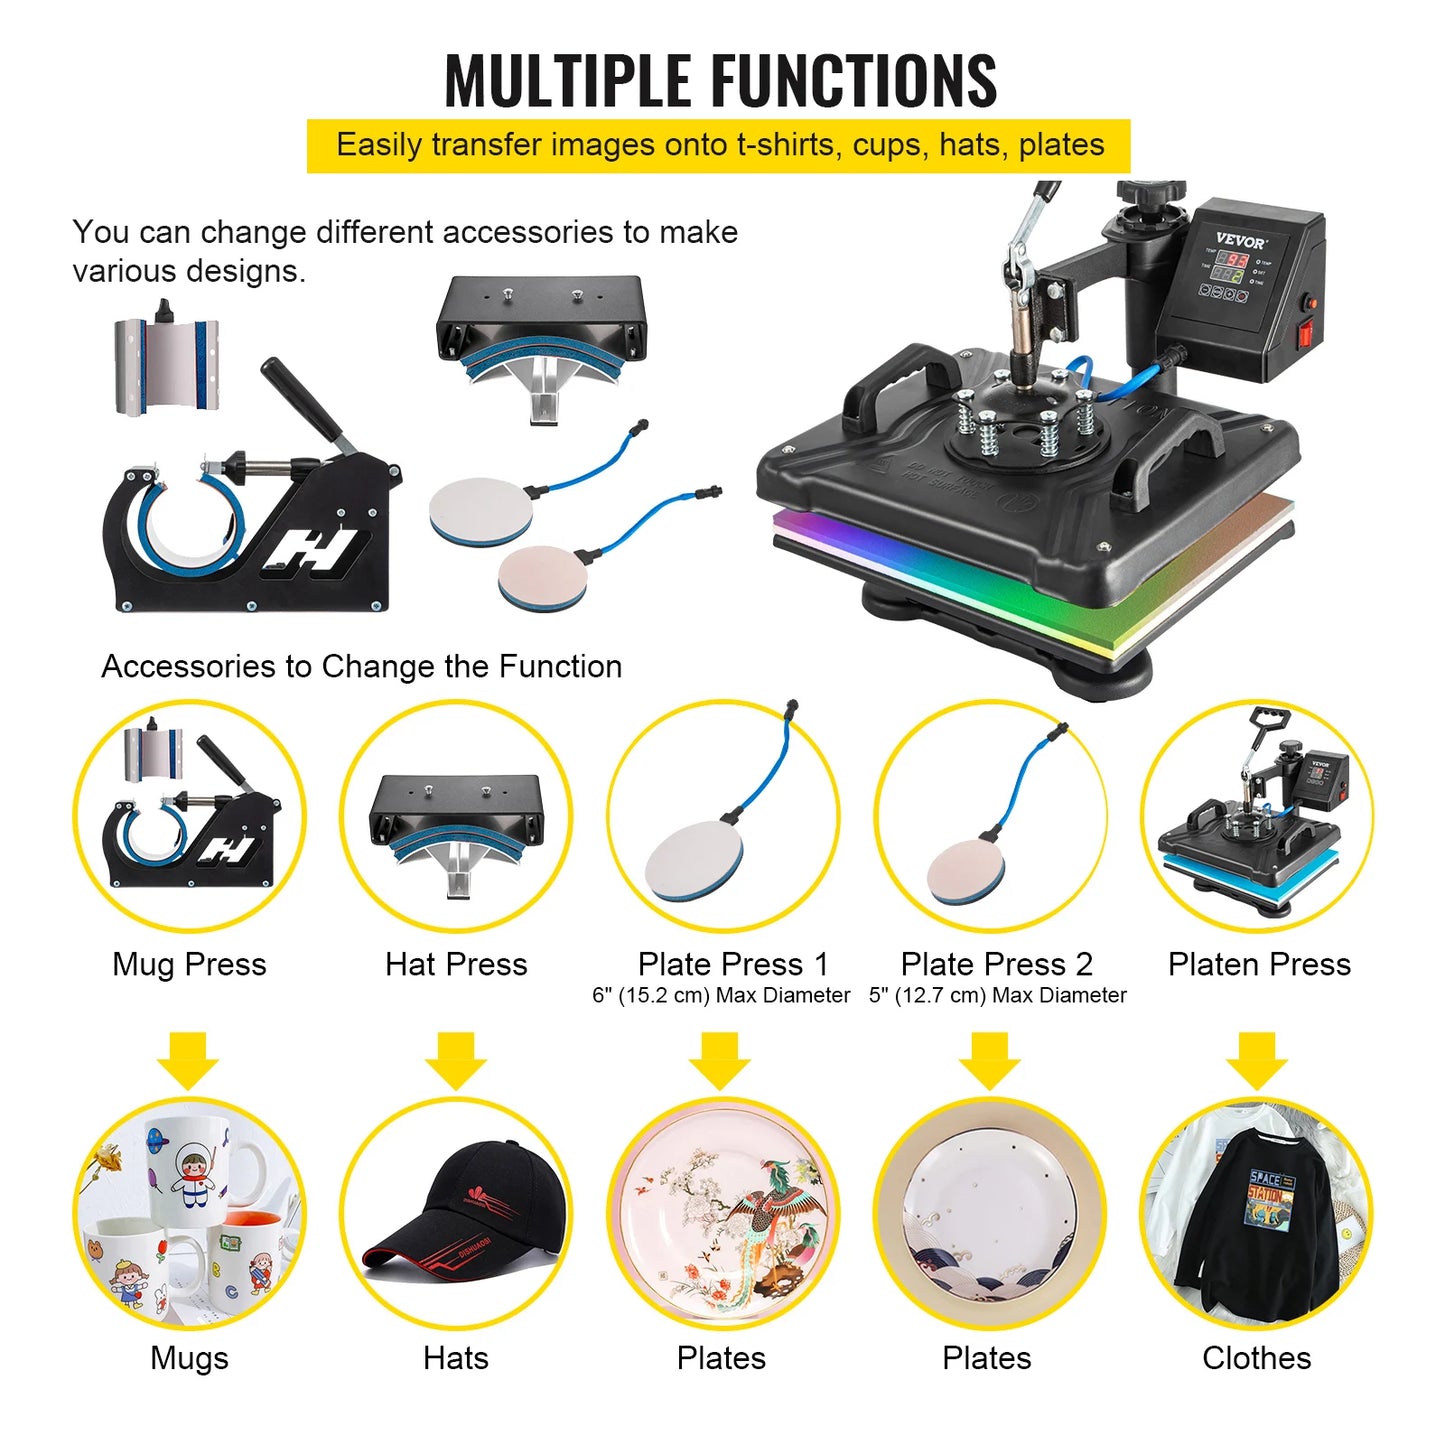 VEVOR Heat Press Multifunctional Sublimation Transfer Machine 12 x15 in 6 Accessories 360 Degree Rotation